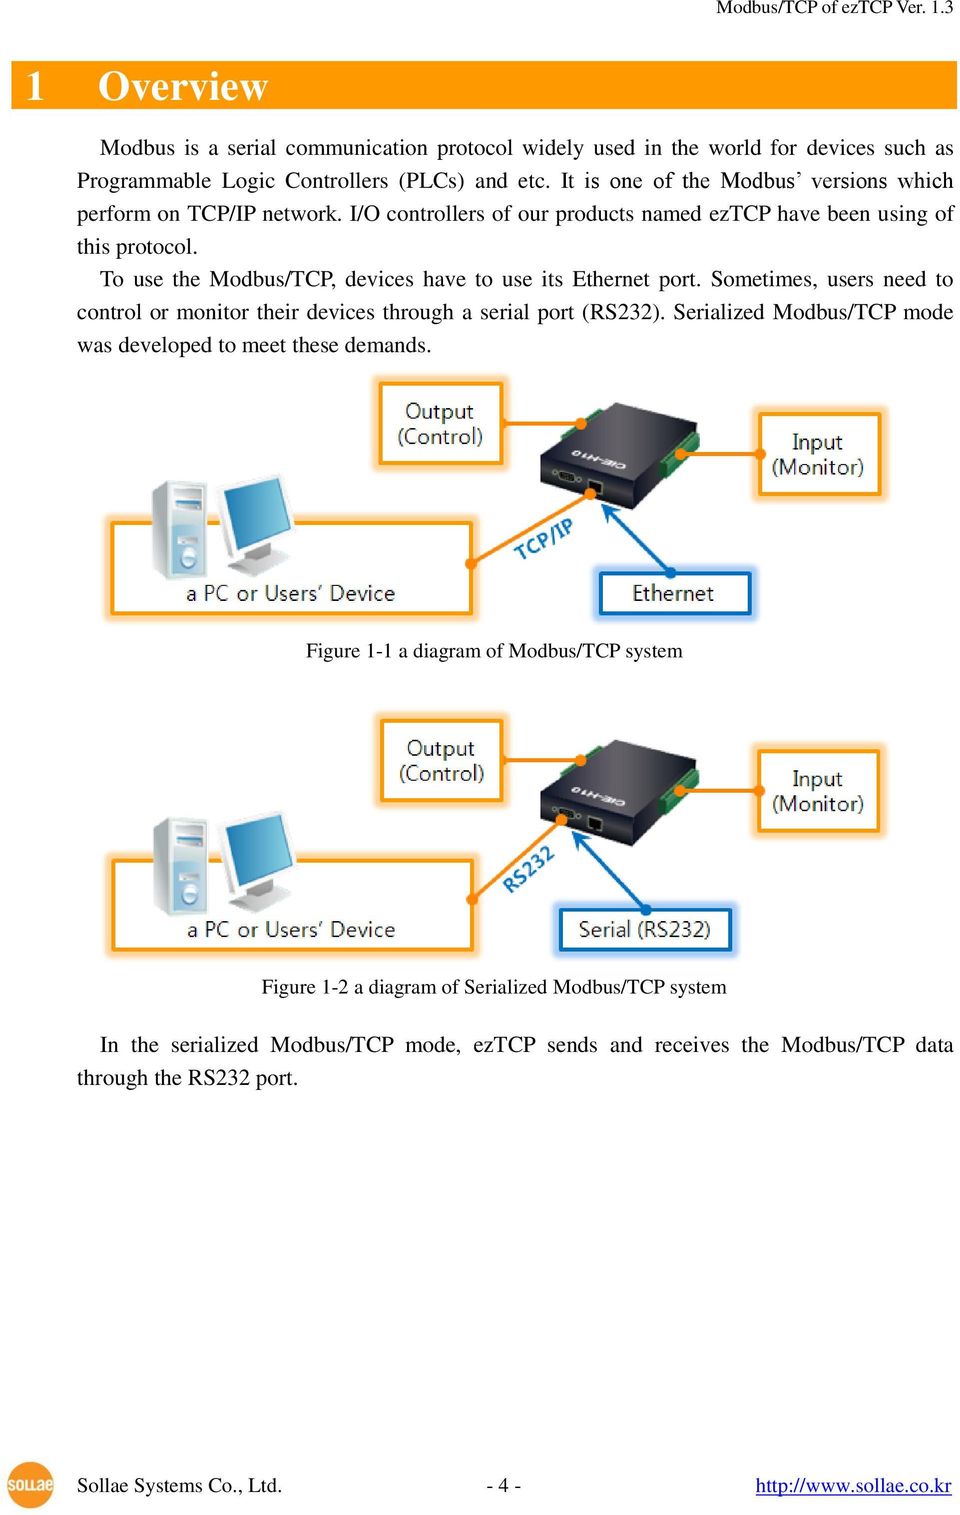 To use the Modbus/TCP, devices have to use its Ethernet port. Sometimes, users need to control or monitor their devices through a serial port (RS232).